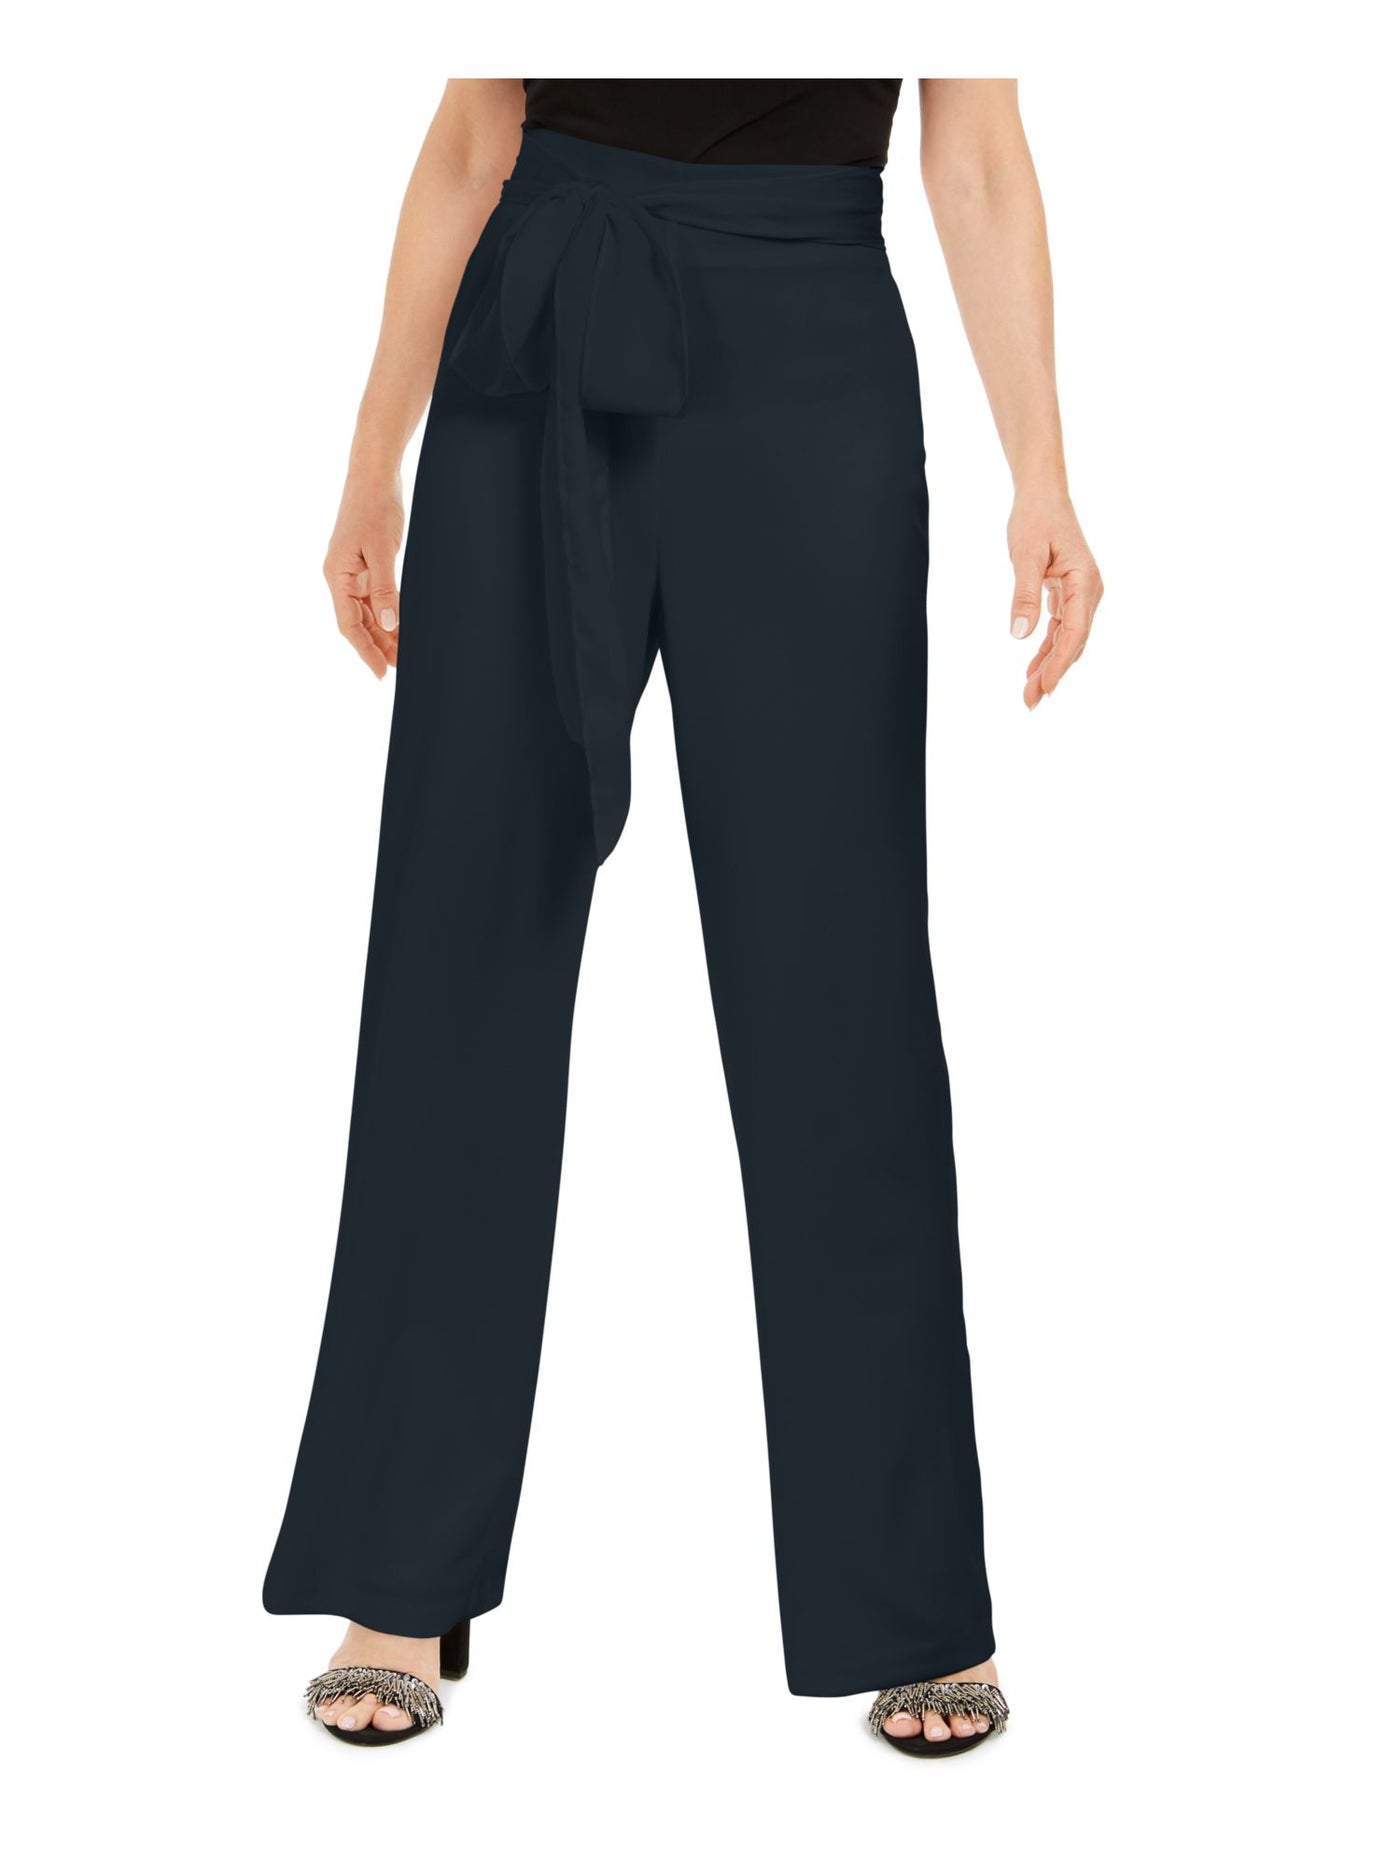 ADRIANNA PAPELL Womens Navy Belted Zippered Wear To Work Wide Leg Pants Petites 12P